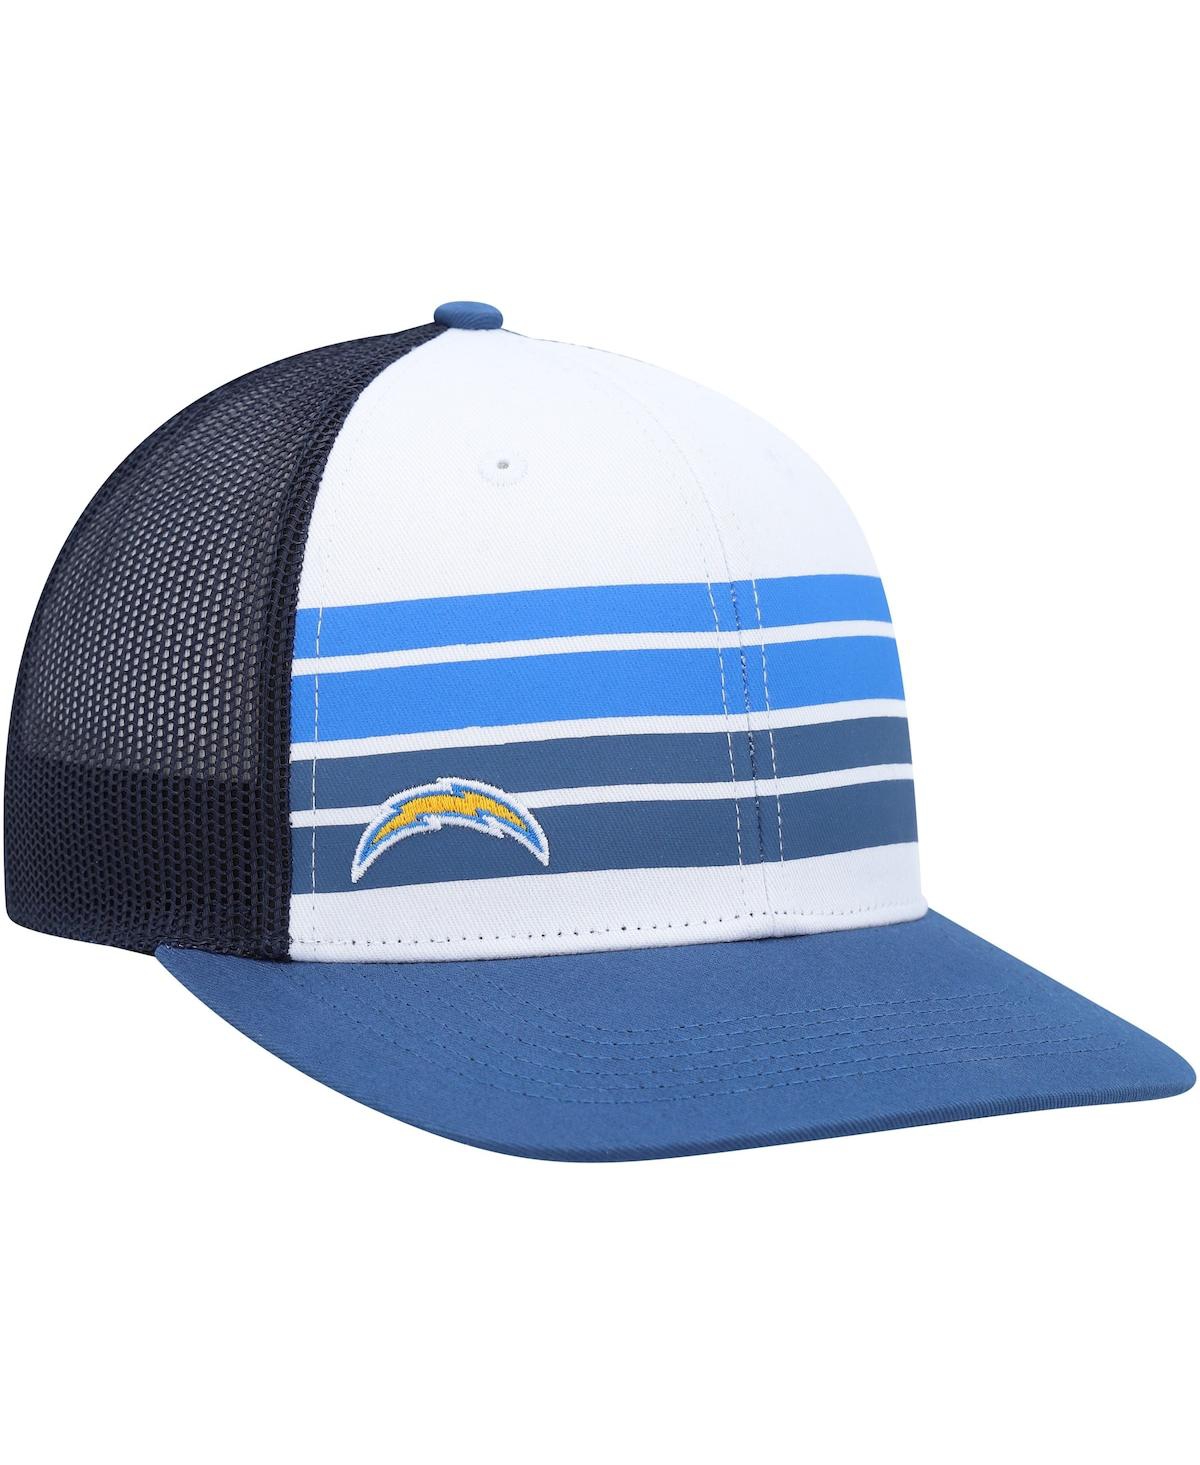 47 Brand Kids' Big Boys And Girls ' White, Blue Los Angeles Chargers Cove Trucker Snapback Hat